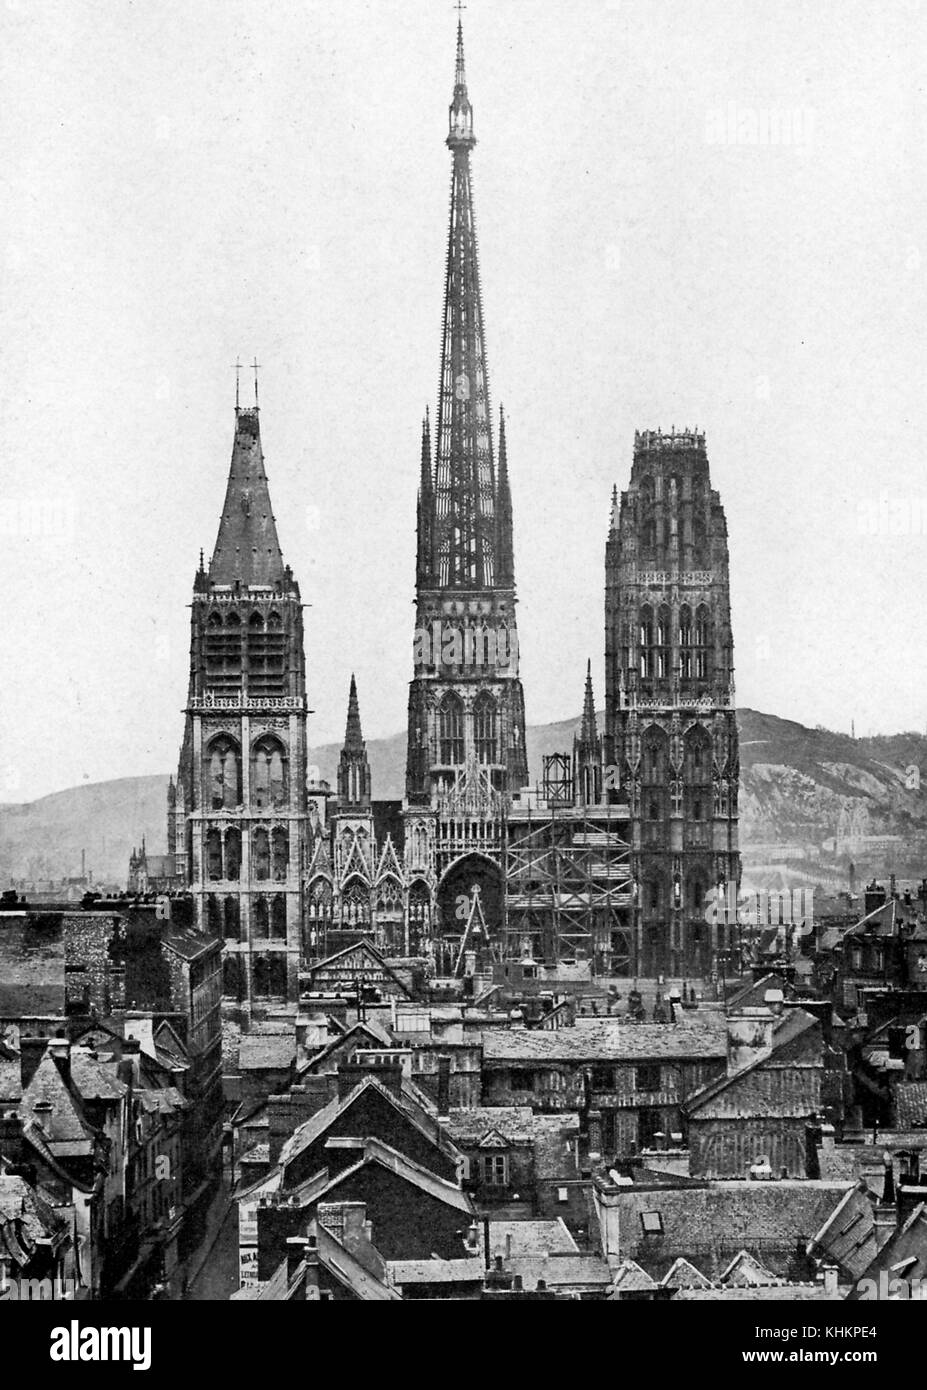 View of Rouen's Notre-Dame Cathedral, considered one of the finest Gothic buildings in Normandy, the Saint Romain tower (at the left) dates to the twelfth century and is the oldest part of the building, photograph by L Boulanger, France, July, 1922. Stock Photo